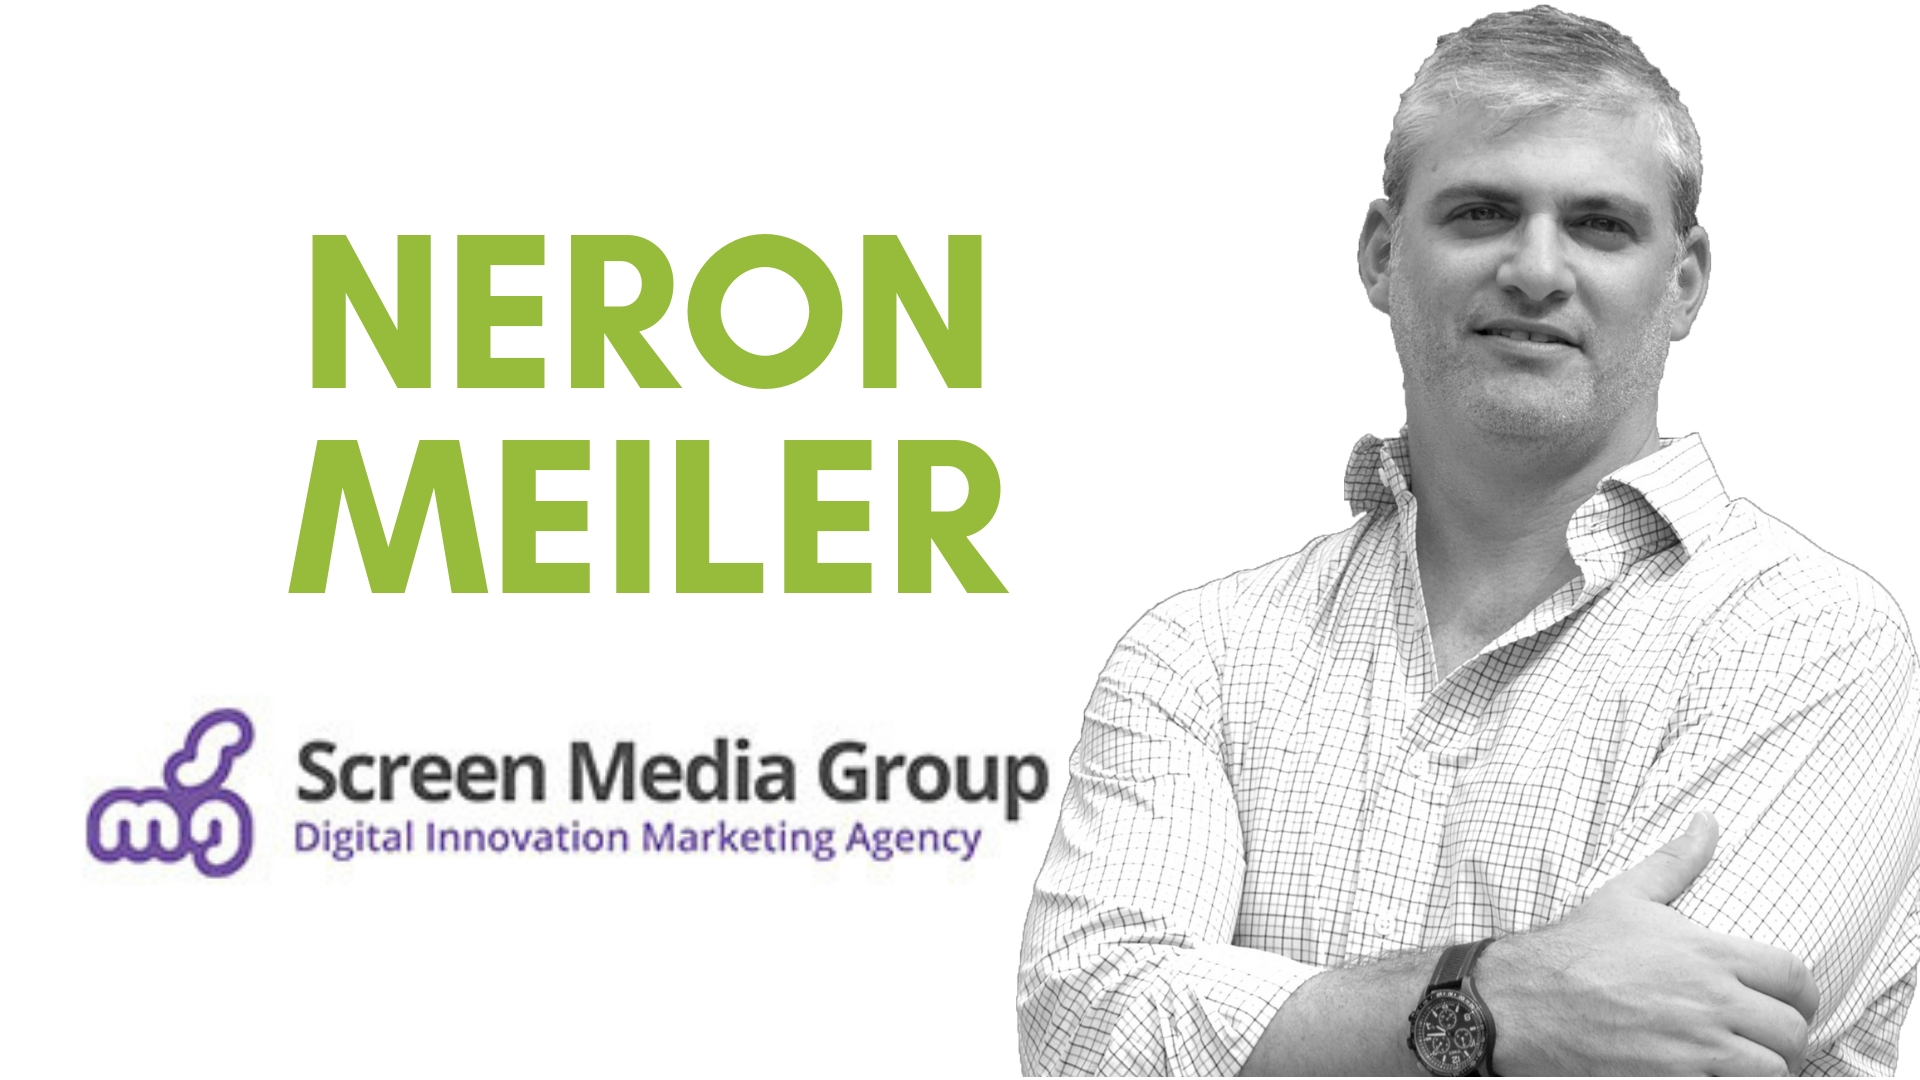 NERON MEILER, SPECIALIST IN DIGITAL MARKETING REVEALS WHAT TO EXPECT IN 2019